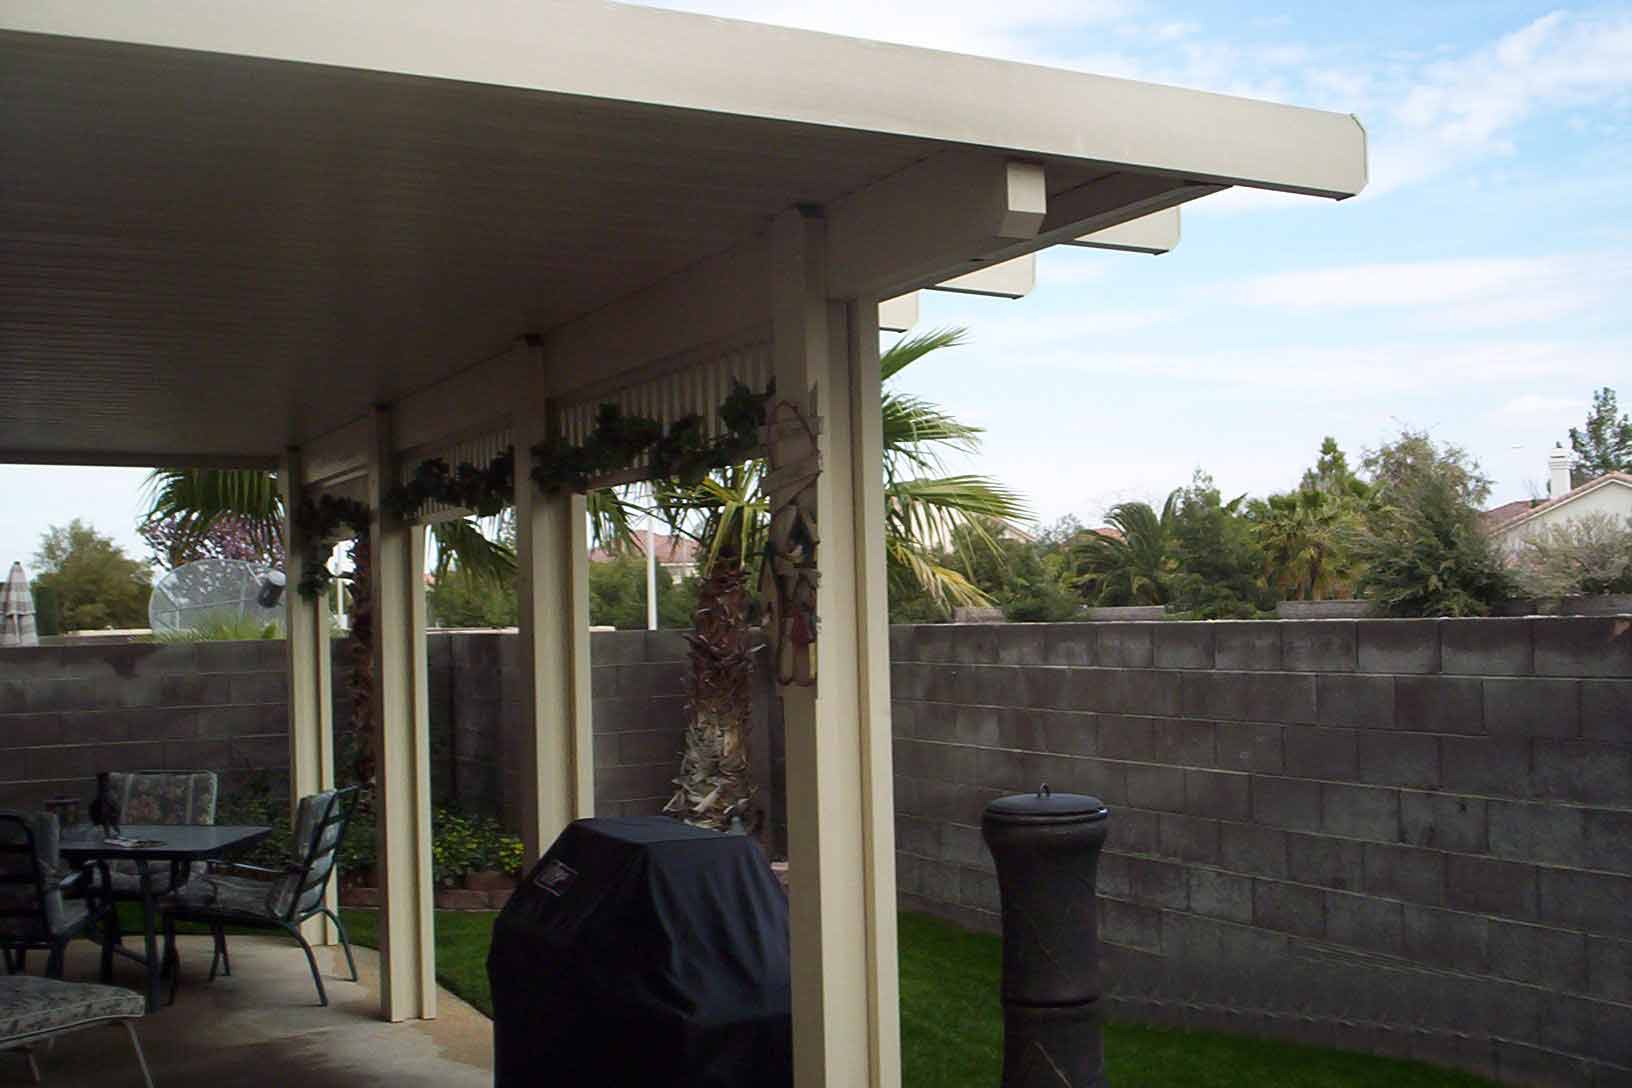 Henderson Roofing Patio Steel Works Patio Covers Of regarding size 1632 X 1088